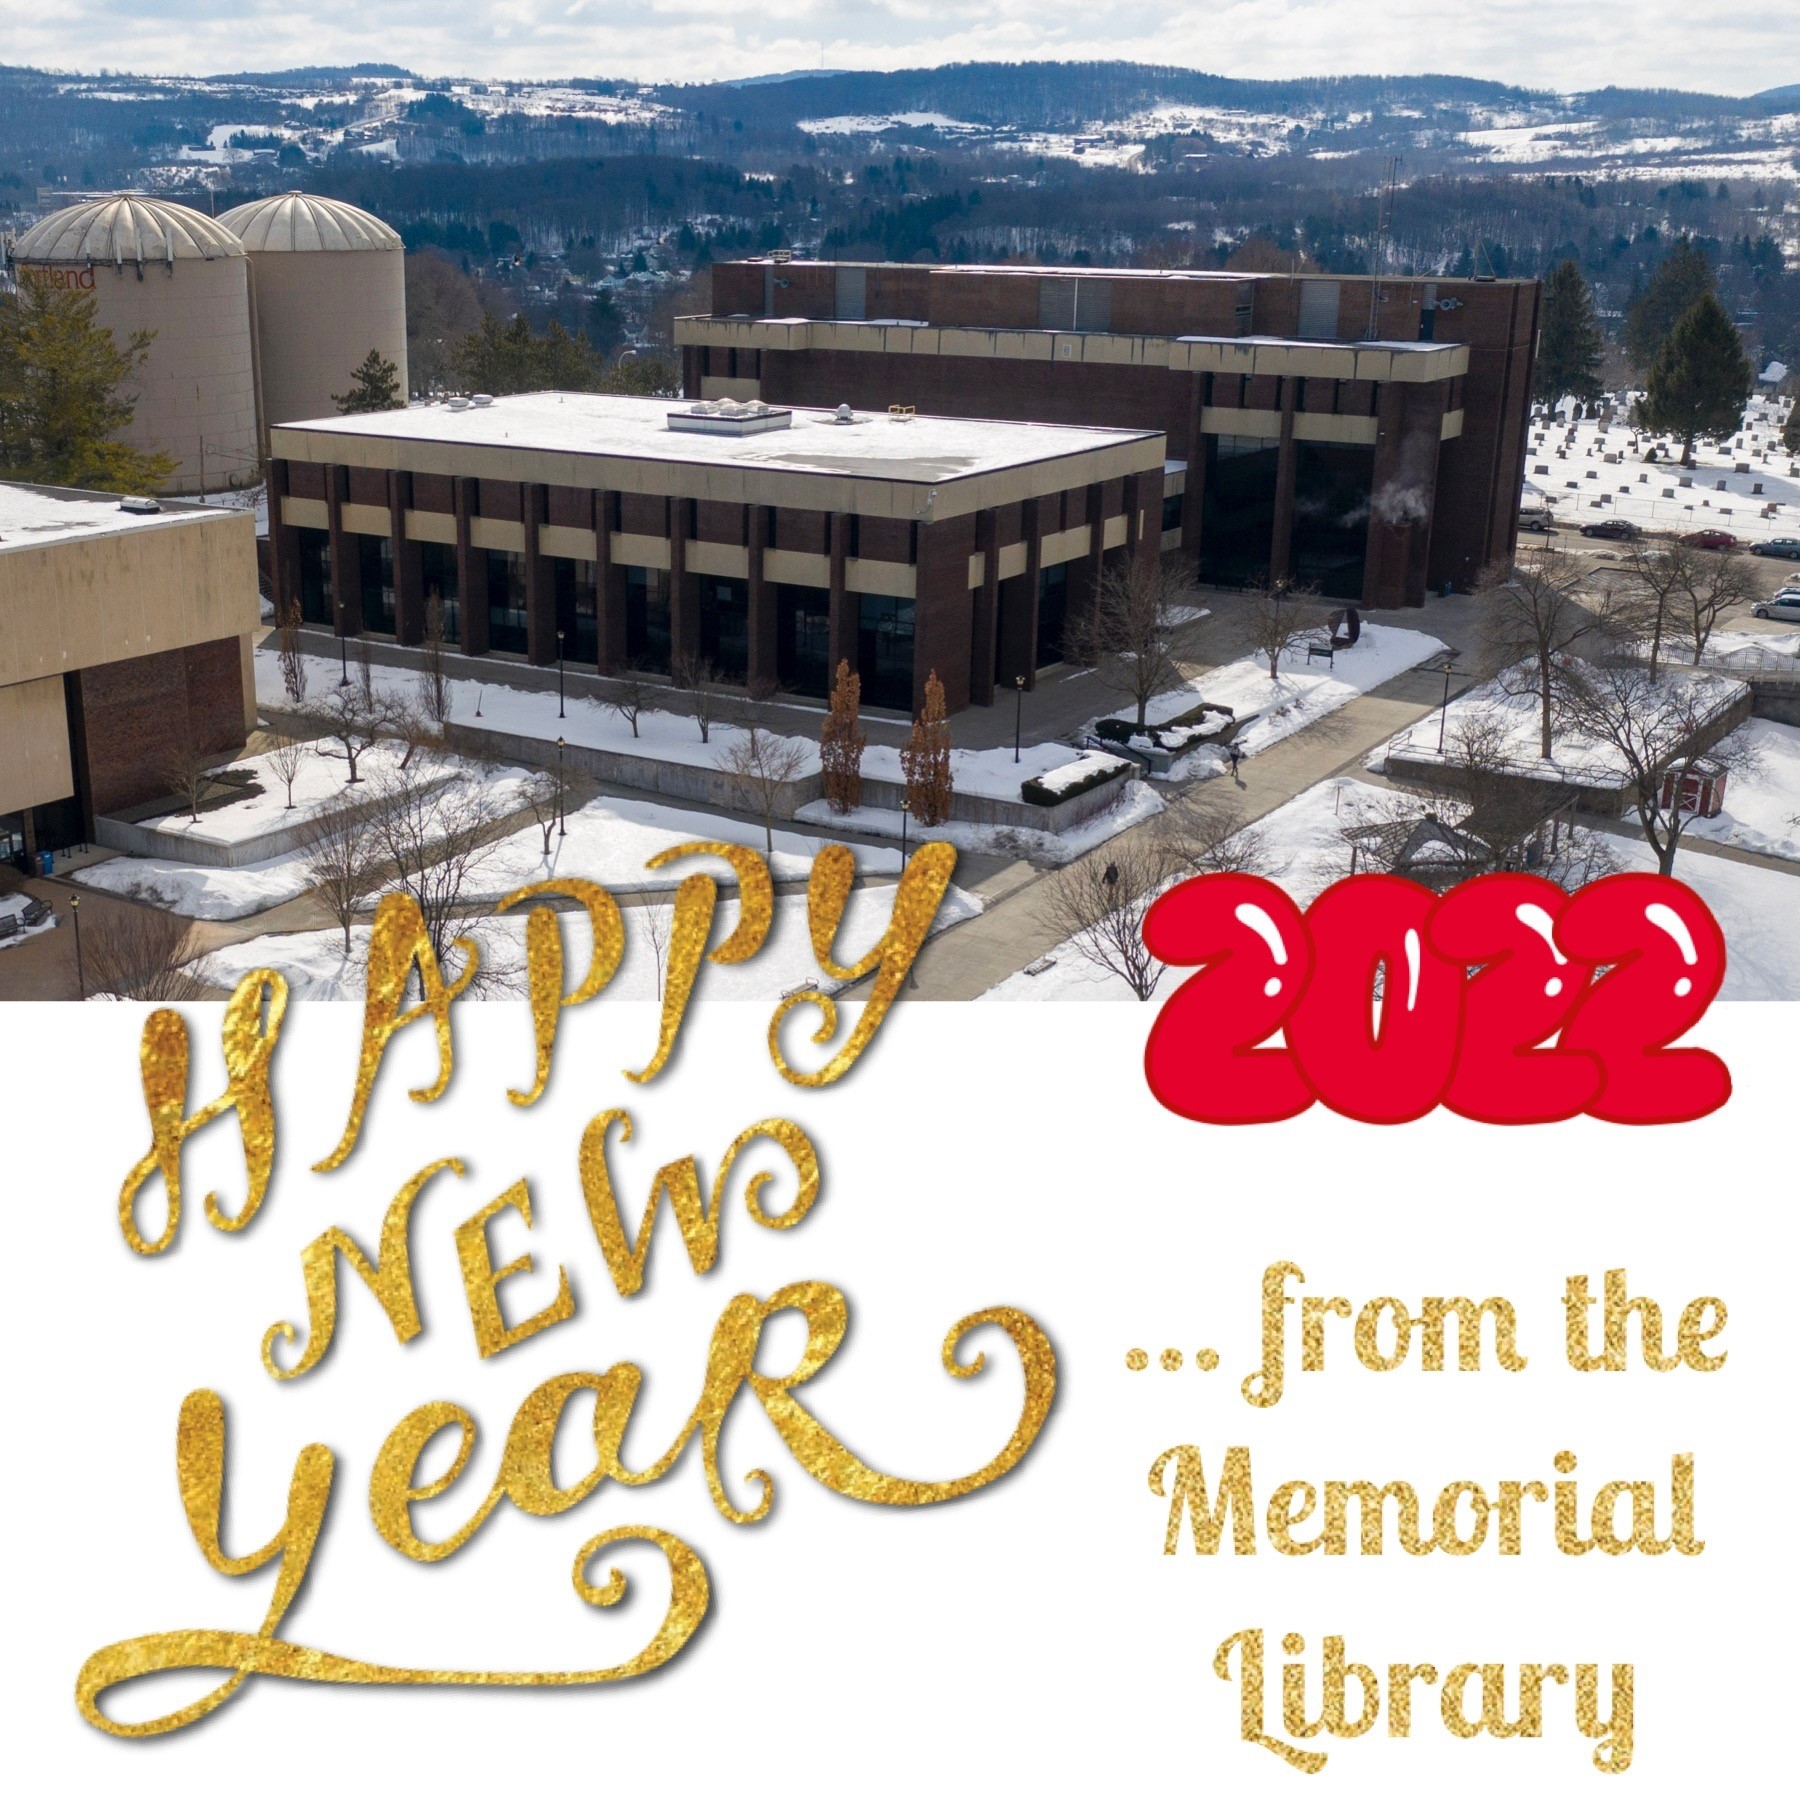 Image of Memorial Library stating Happy New Year 2022